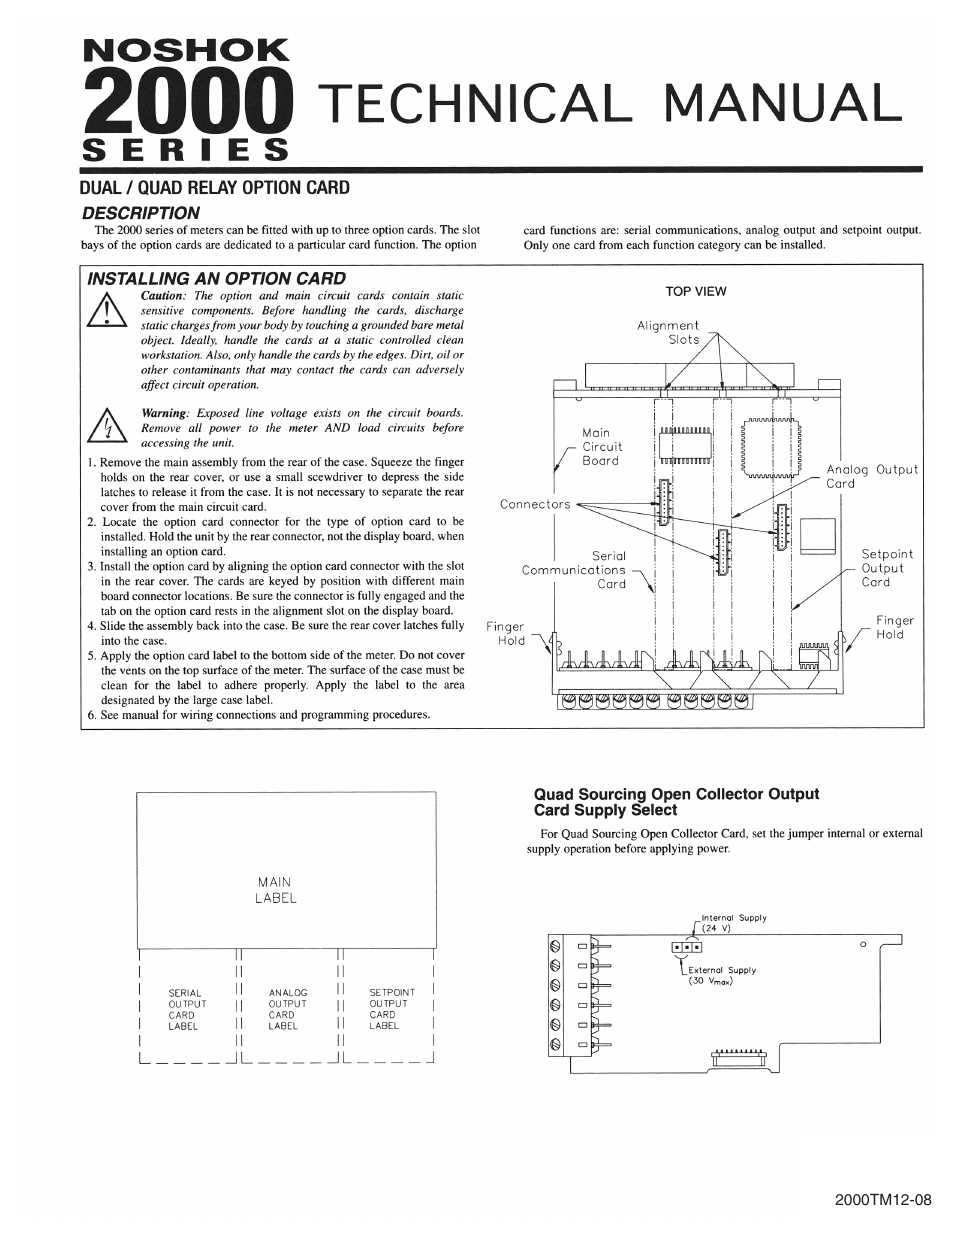 NOSHOK 2000 Series Dual/Quad Relay Option Card User Manual | 2 pages